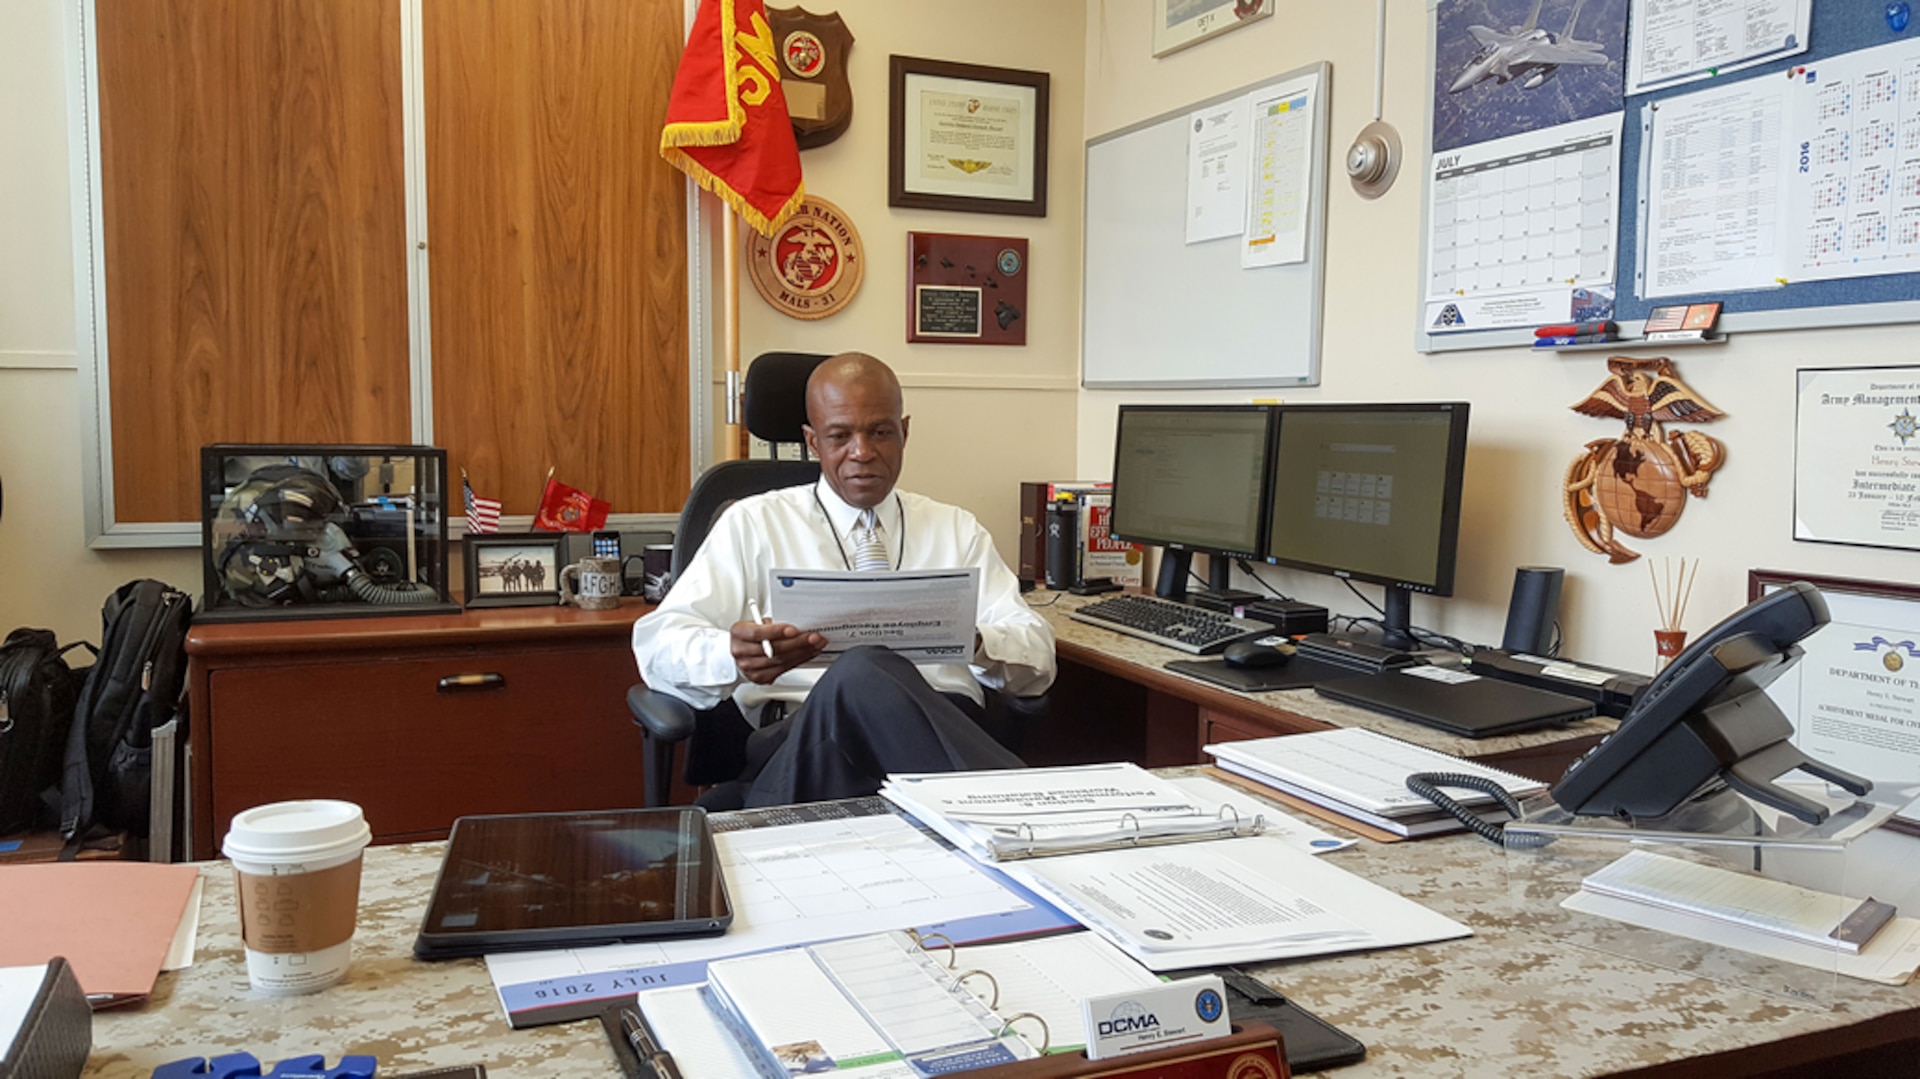 Henry Stewart, Defense Contract Management Agency Garden City, New York, quality assurance supervisor and Tier II Leadership Development Program manager, is a retired master sergeant who spent 22 years in the Marine Corps before joining the agency.